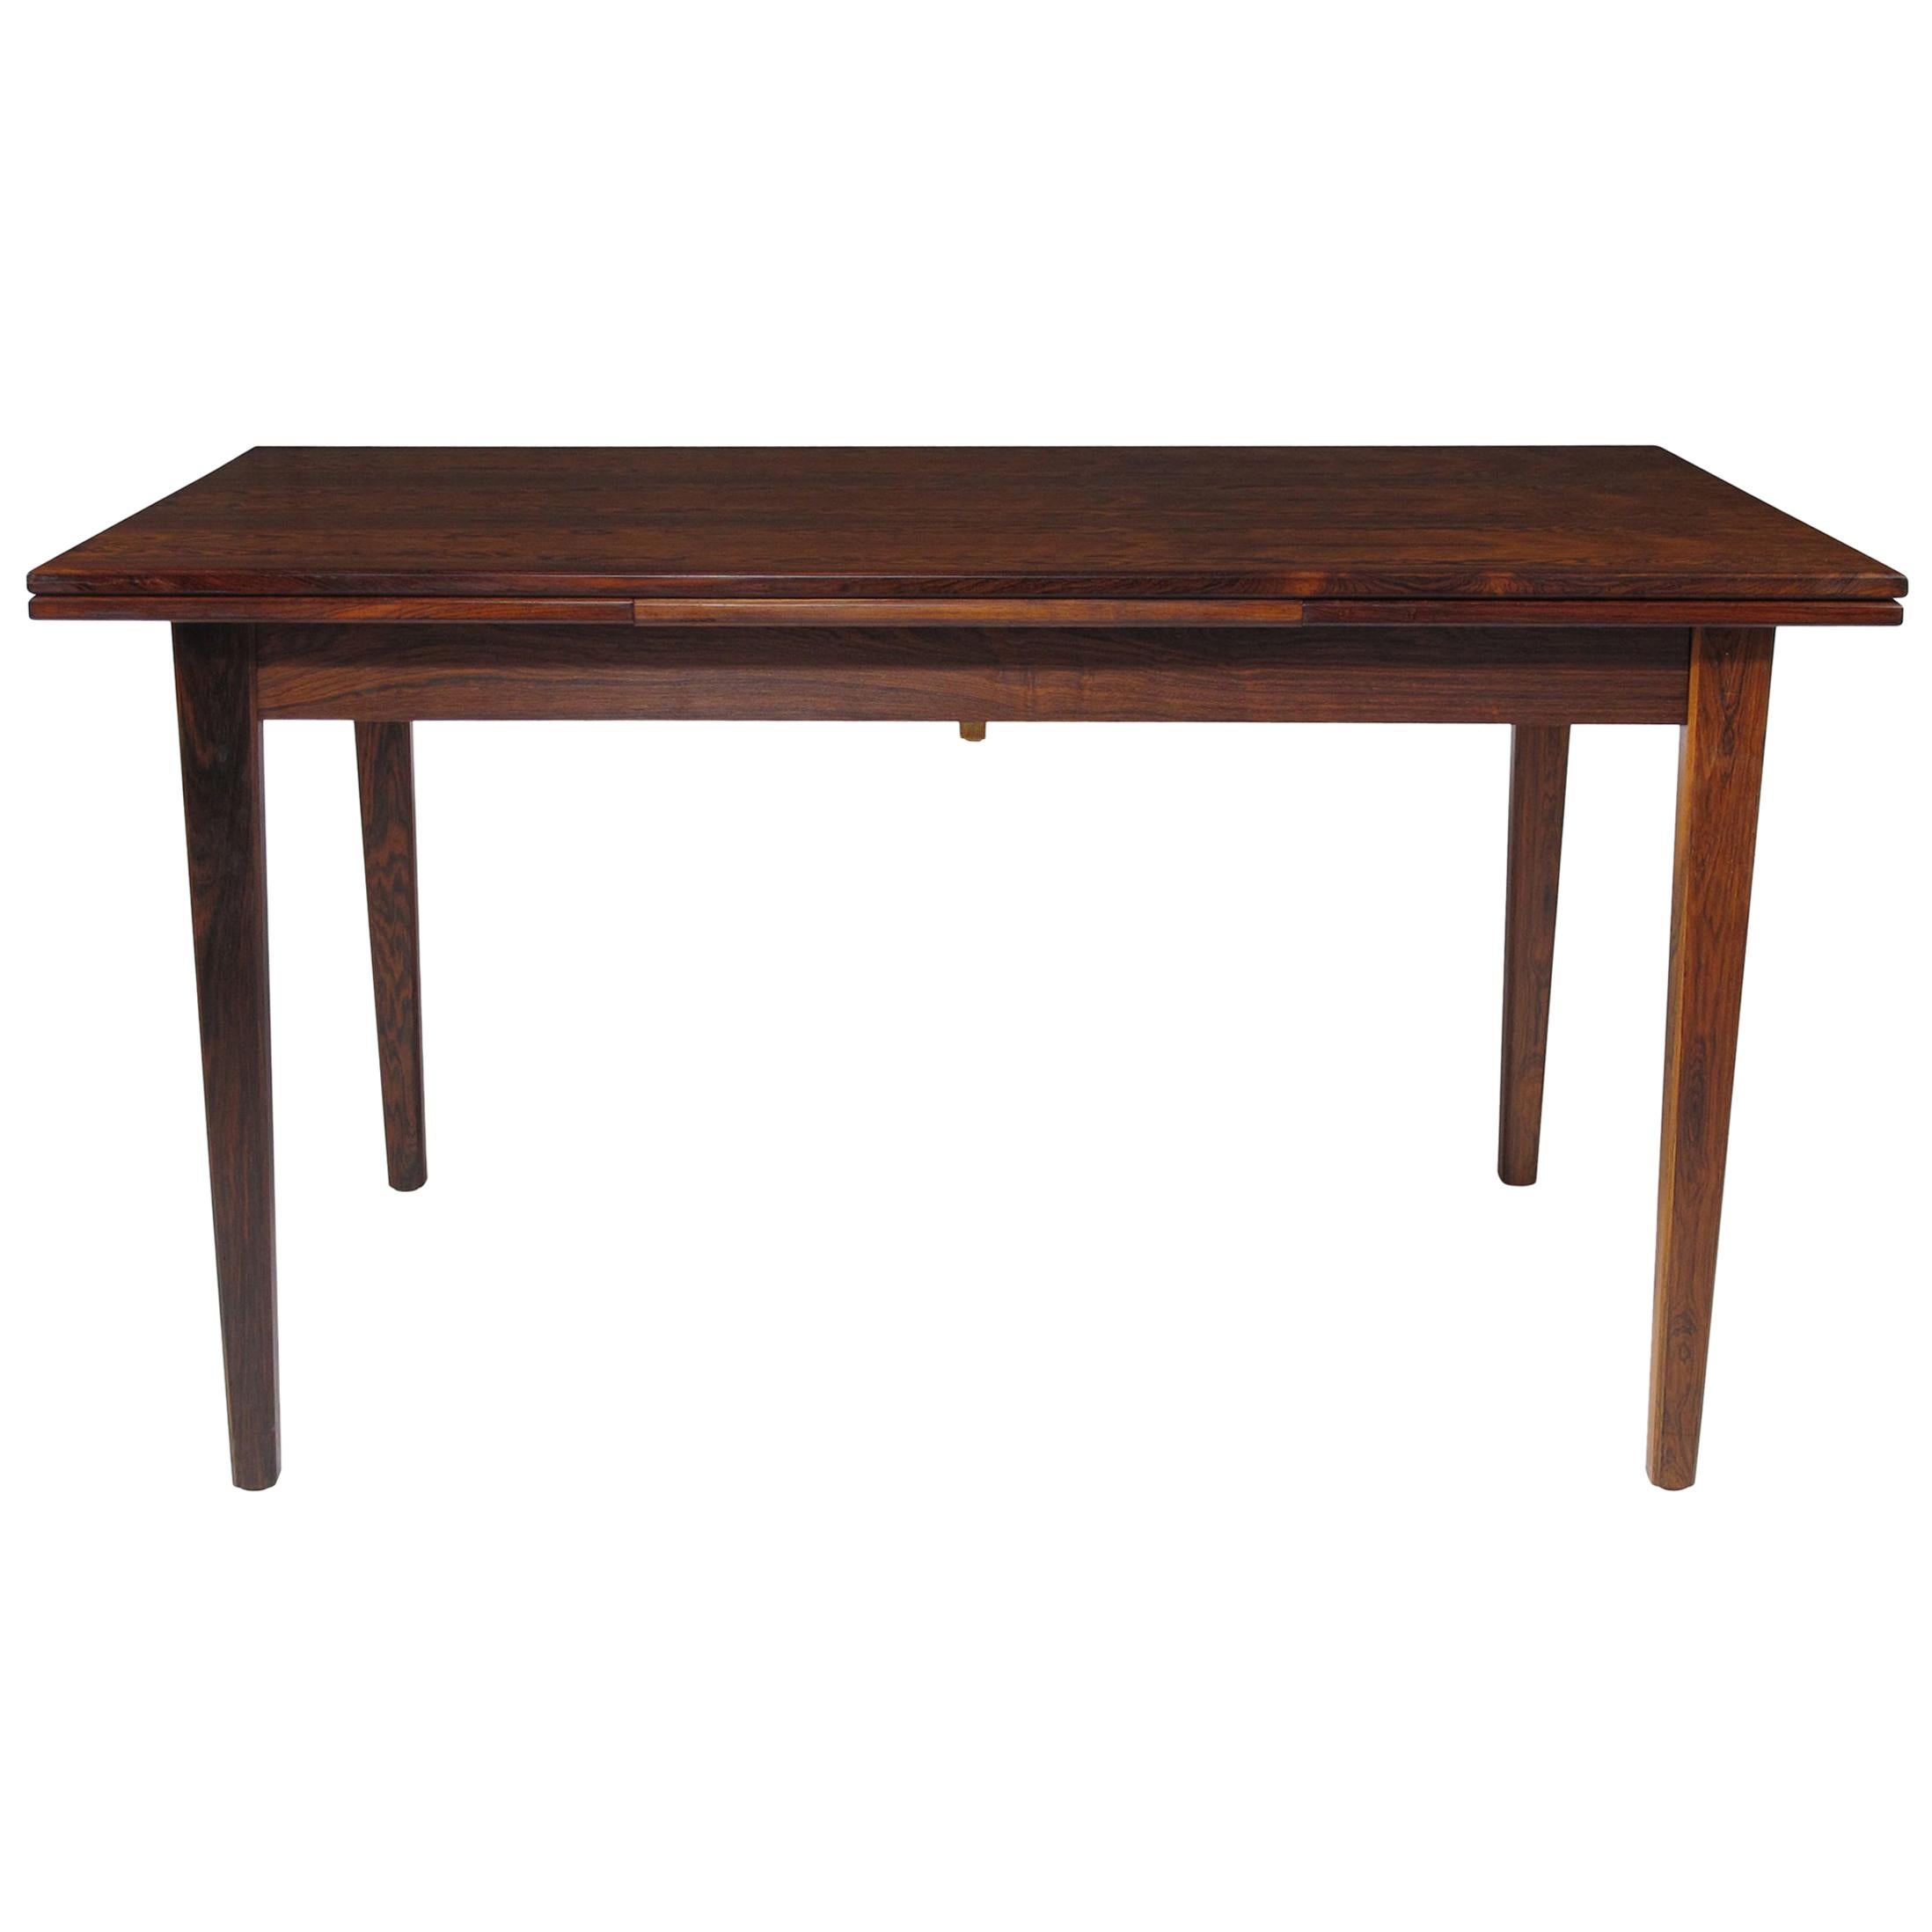 Midcentury Brazilian Rosewood Dining with Dramatic Grain